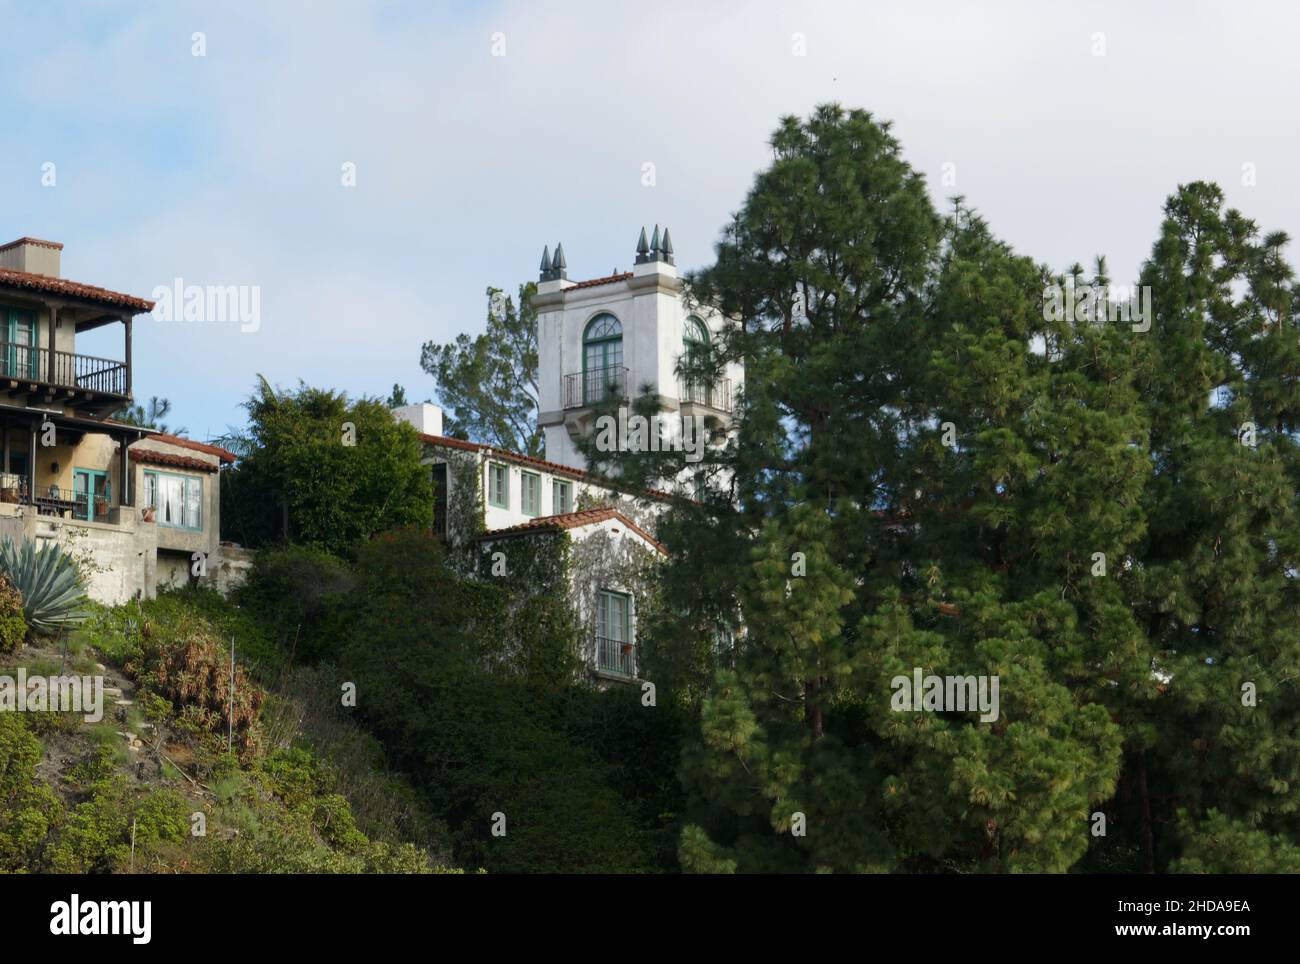 Los Angeles, California, USA 31st December 2021 A general view of atmosphere of Castillo del Lago, former home of Gangster Bugsy Siegel and Singer Madonna at 6342 Mullholland Highway on December 31, 2021 in Los Angeles, California, USA. Photo by Barry King/Alamy Stock Photo Stock Photo